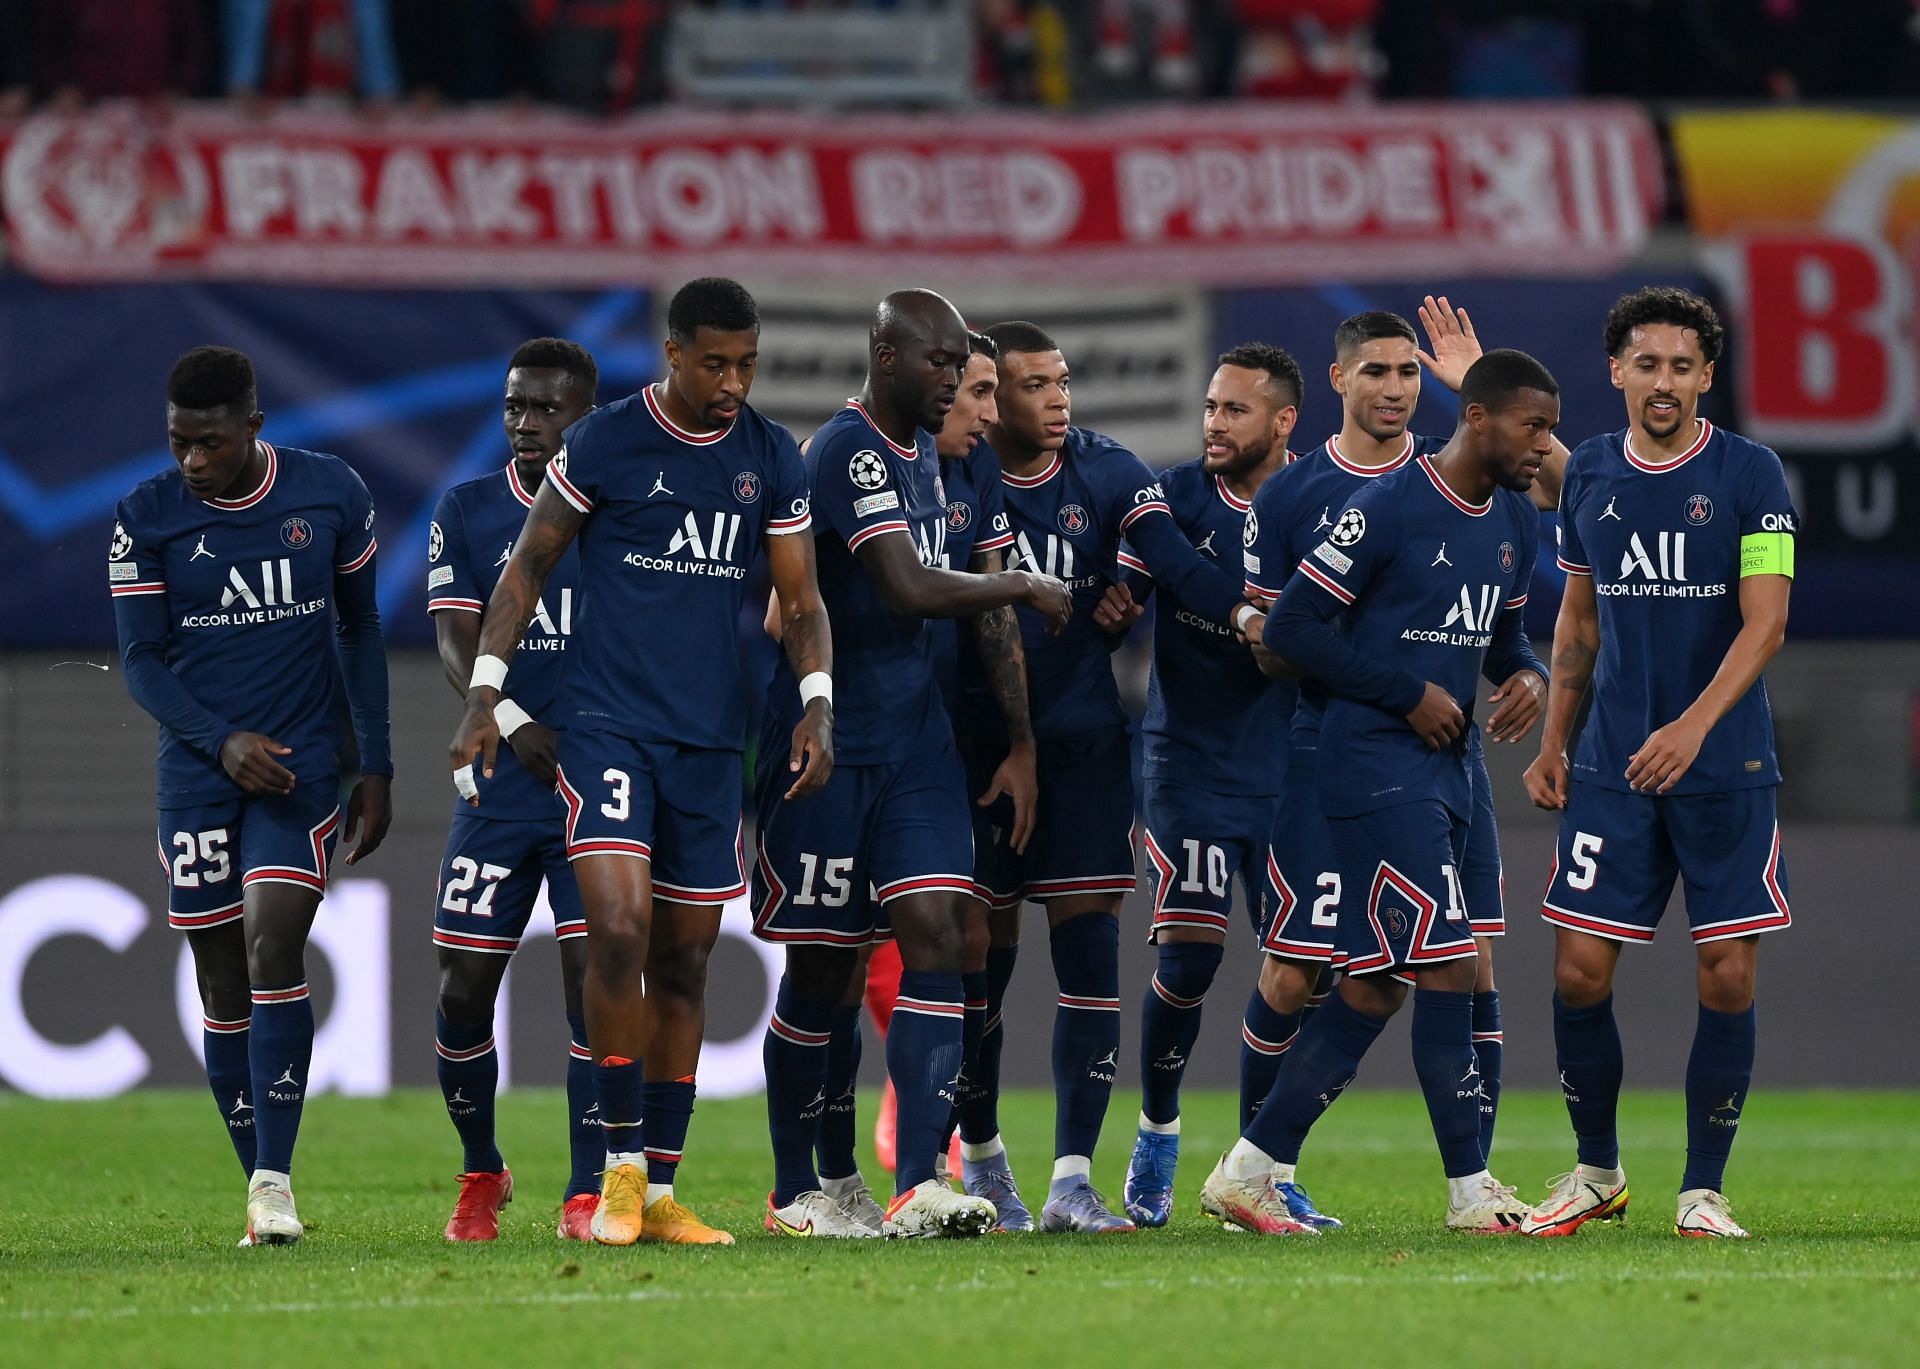 PSG secured a 4-0 victory over Reims